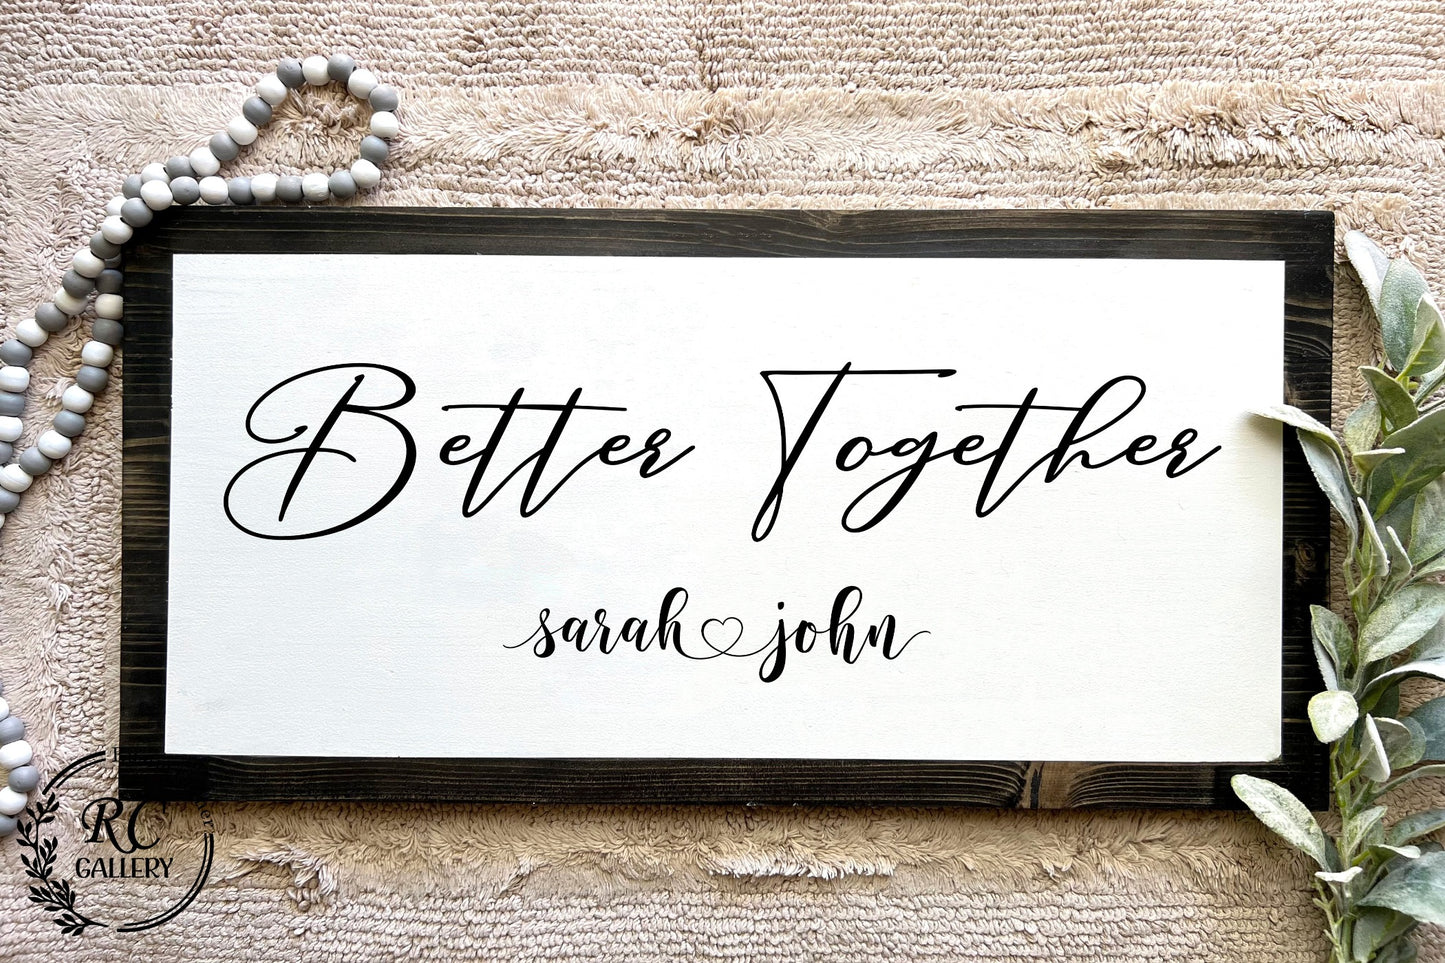 Better together, personalized wood sign.